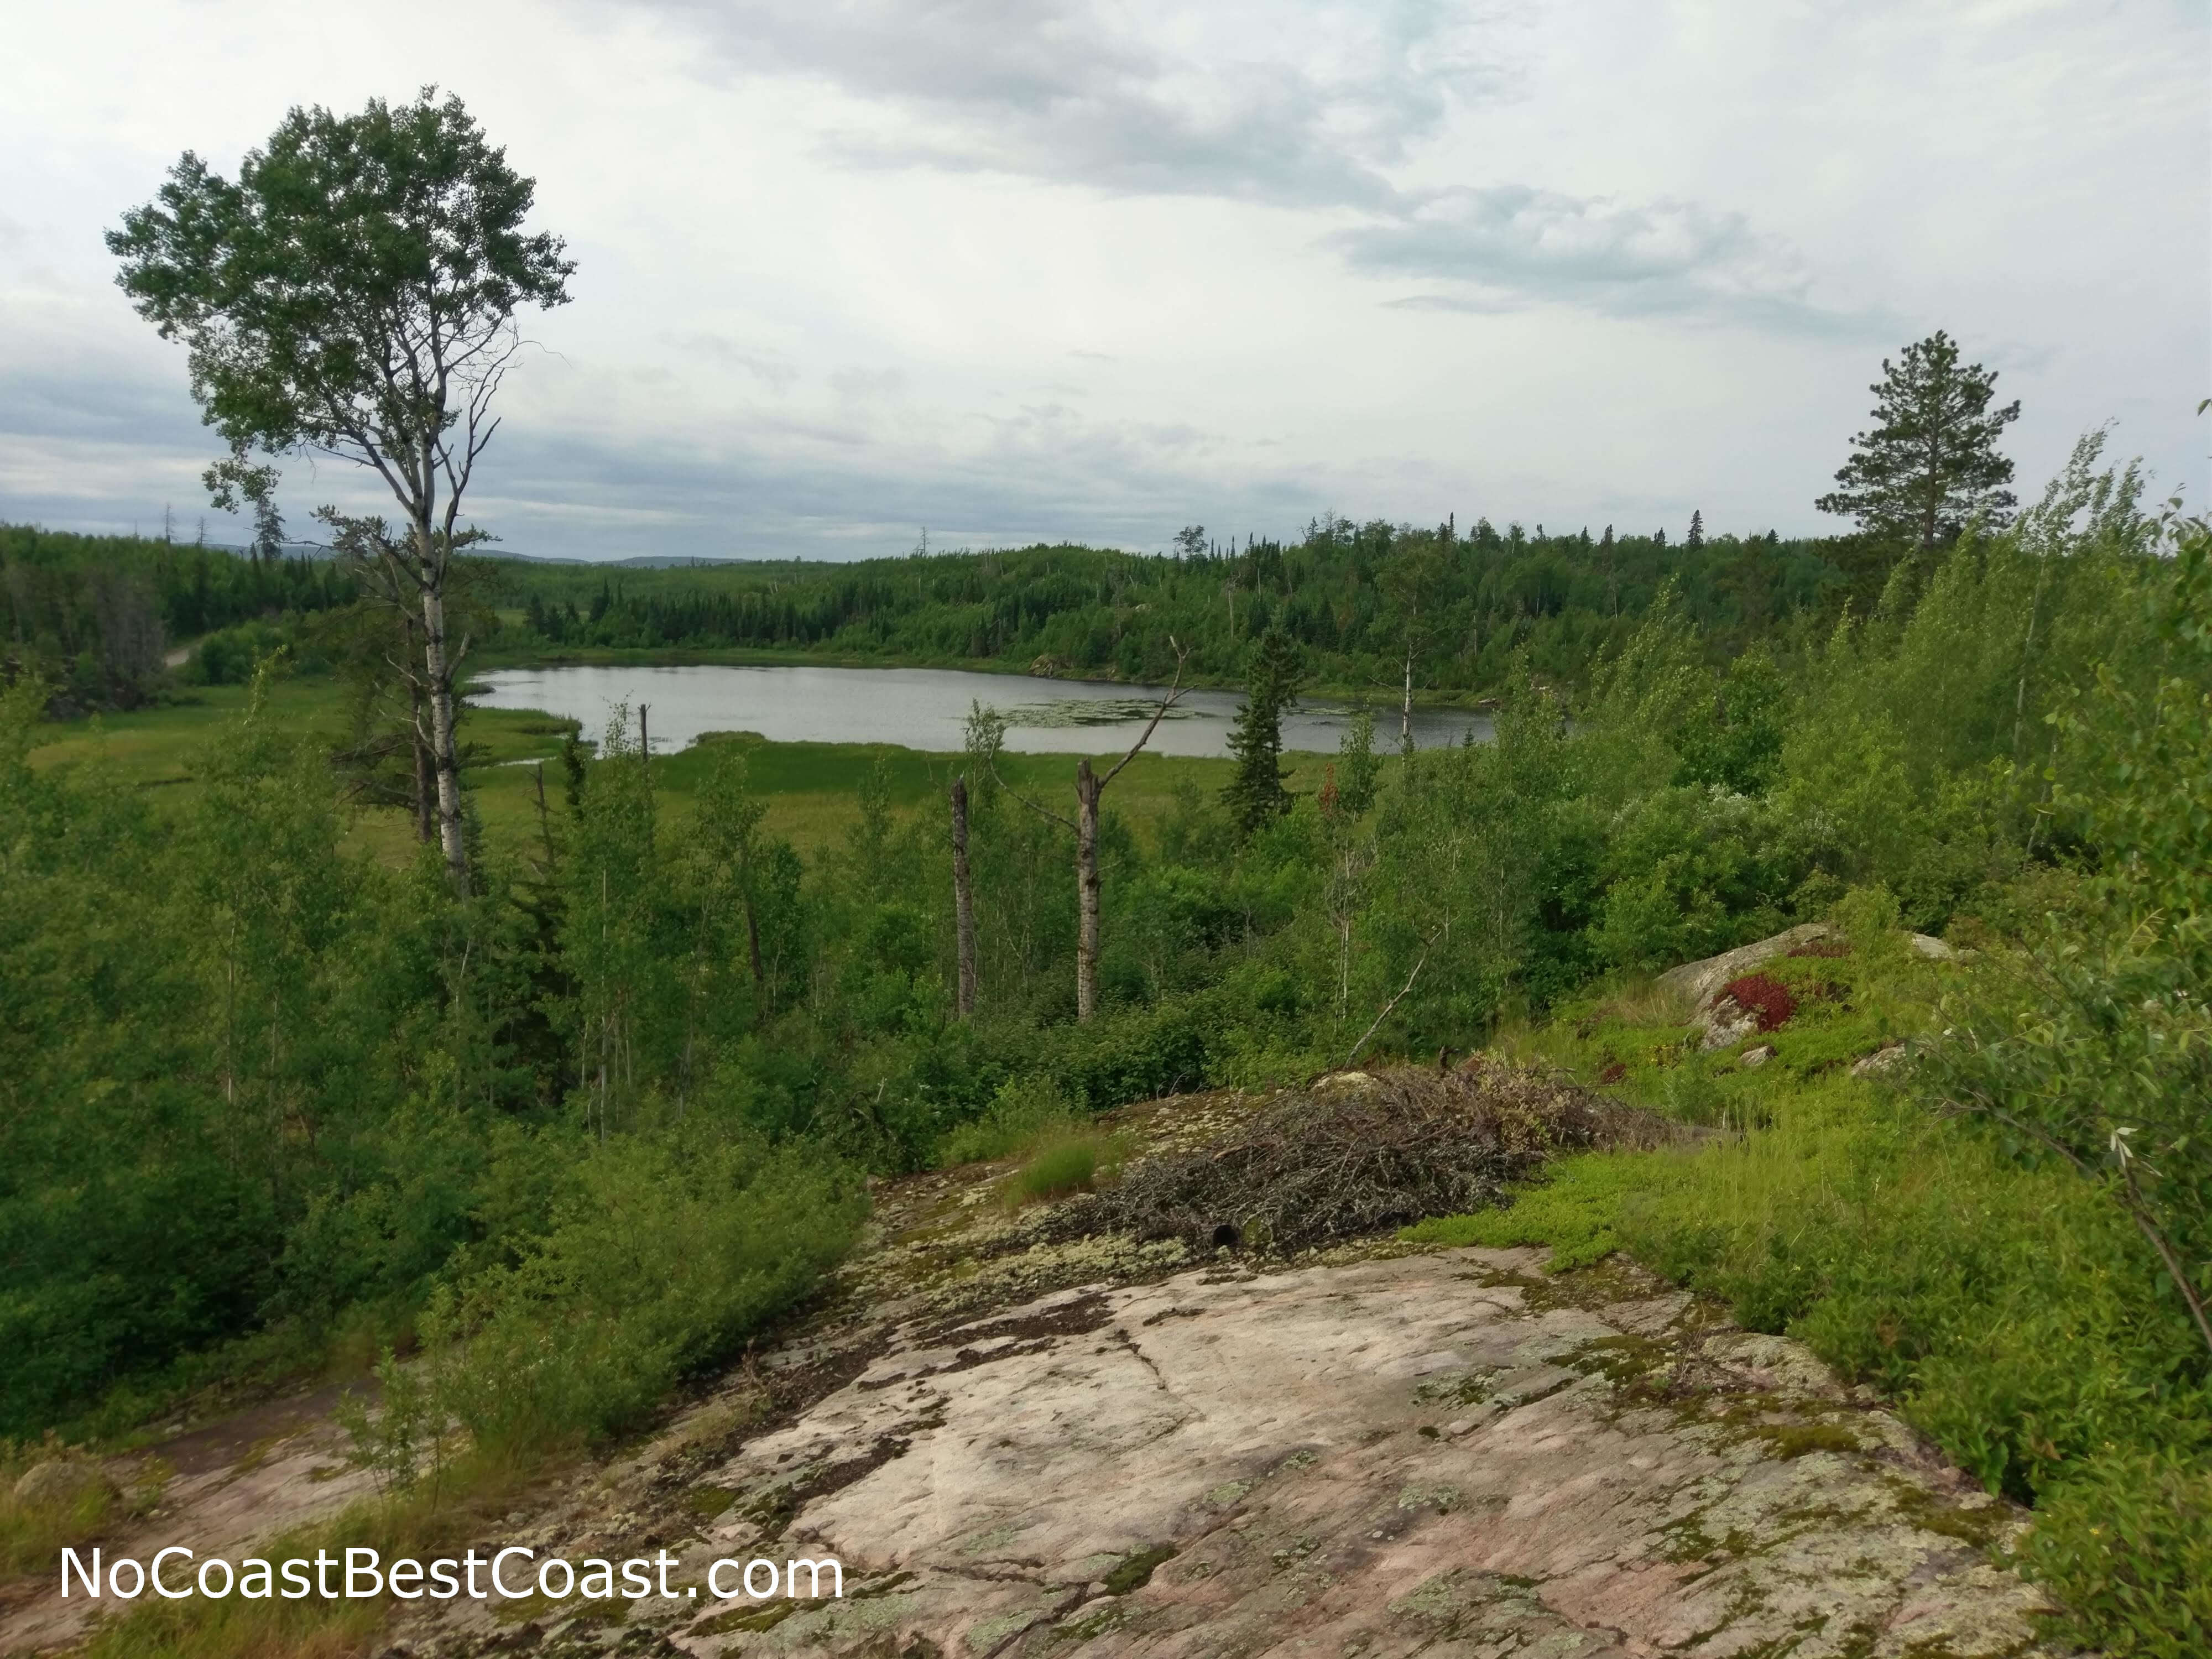 The view from Moose Pond Point, overlooking (obviously) Moose Pond